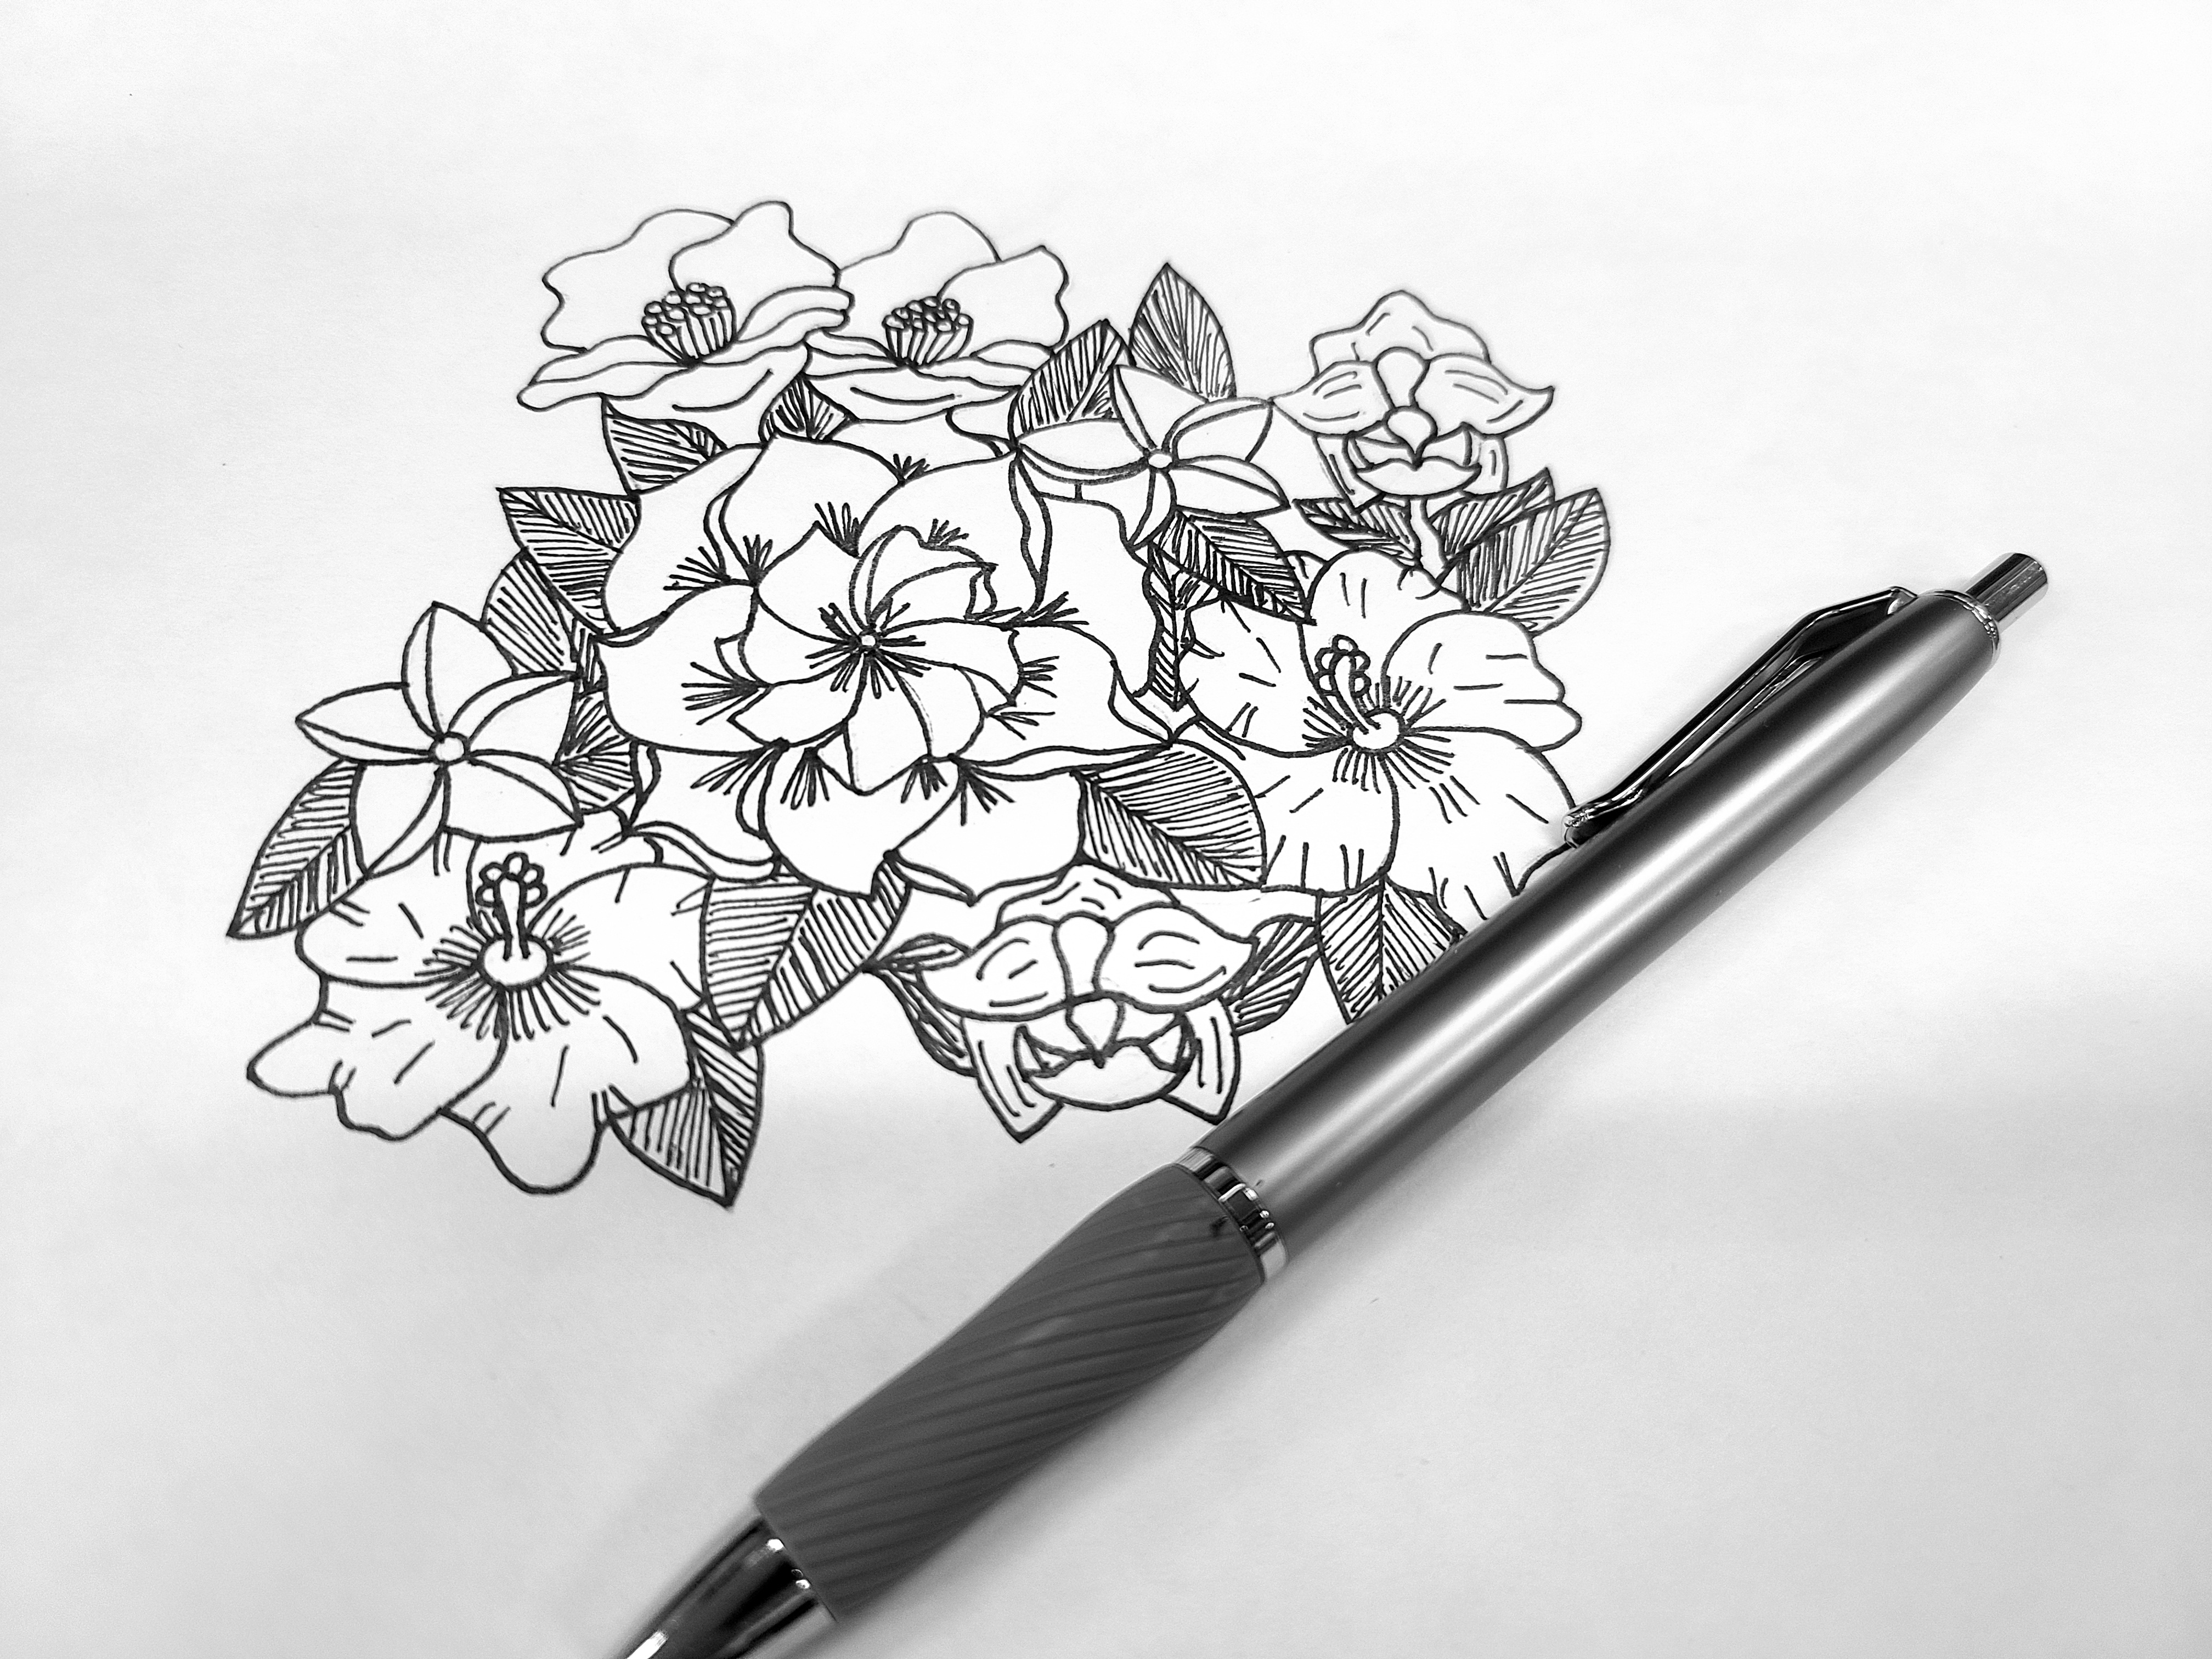 A black and white drawn flower next to a pen